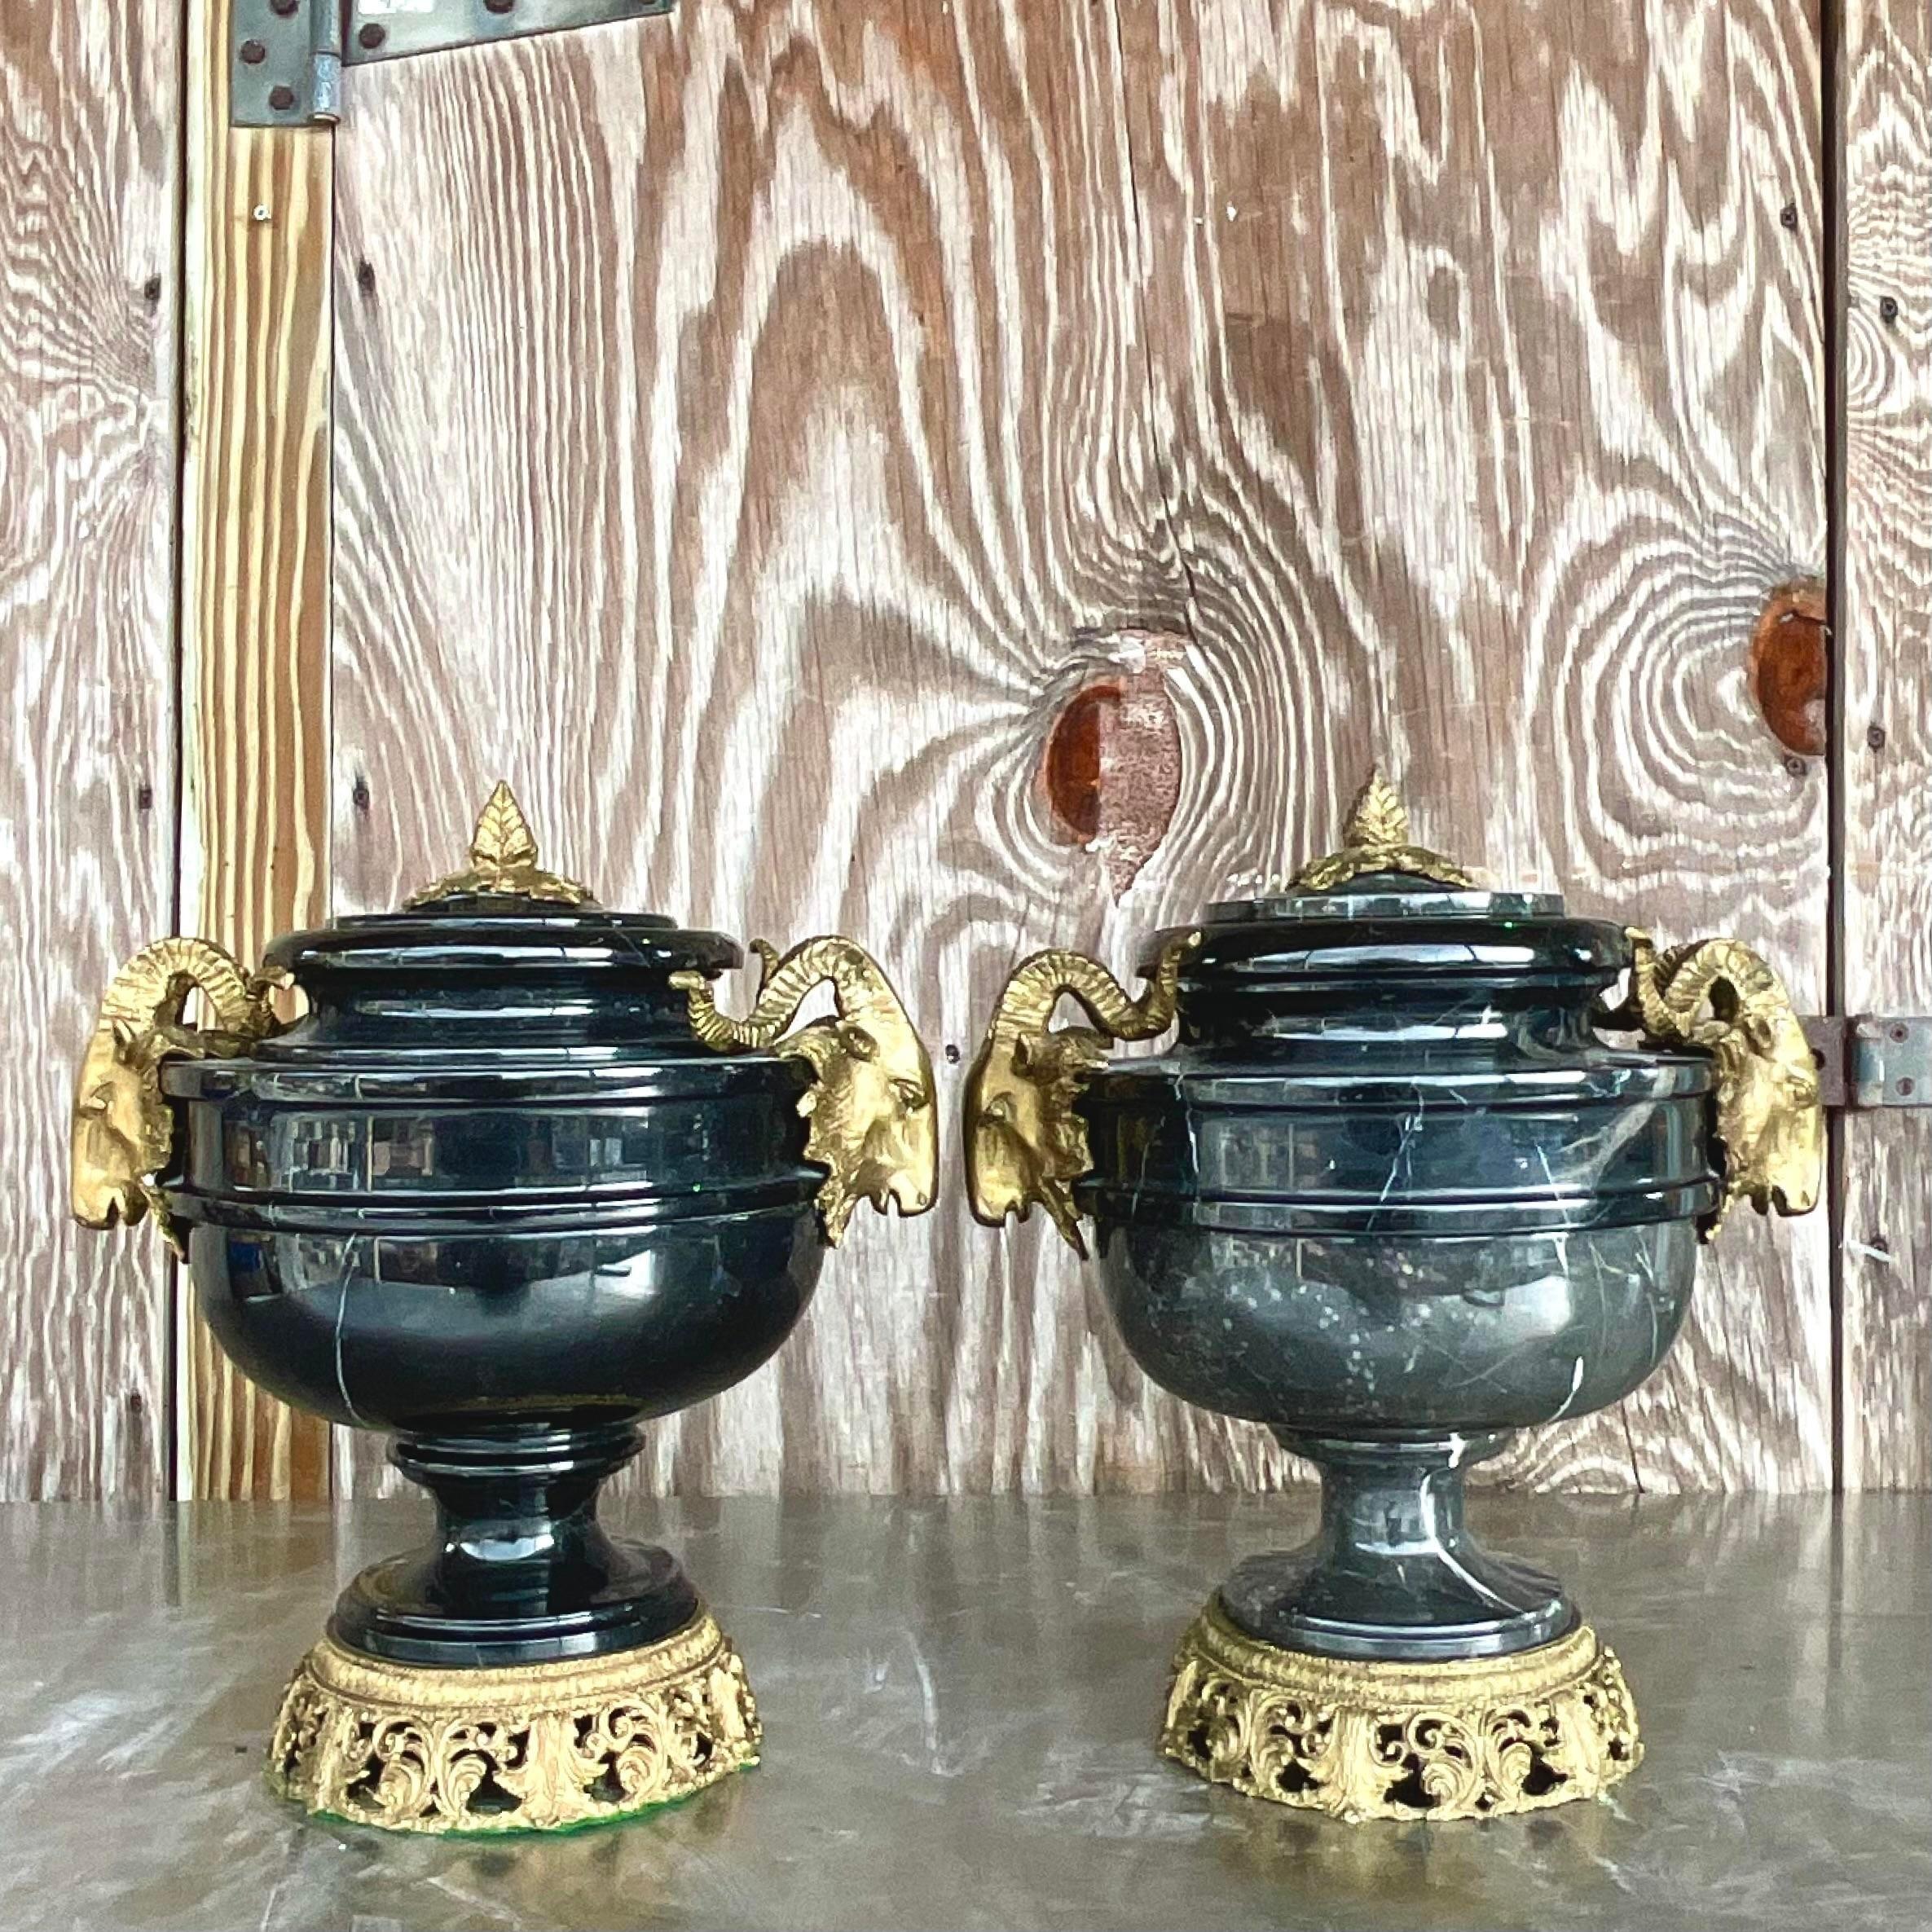 Vintage Boho Black Marble and Brass Ram’s Head Lidded Urns - a Pair In Good Condition For Sale In west palm beach, FL